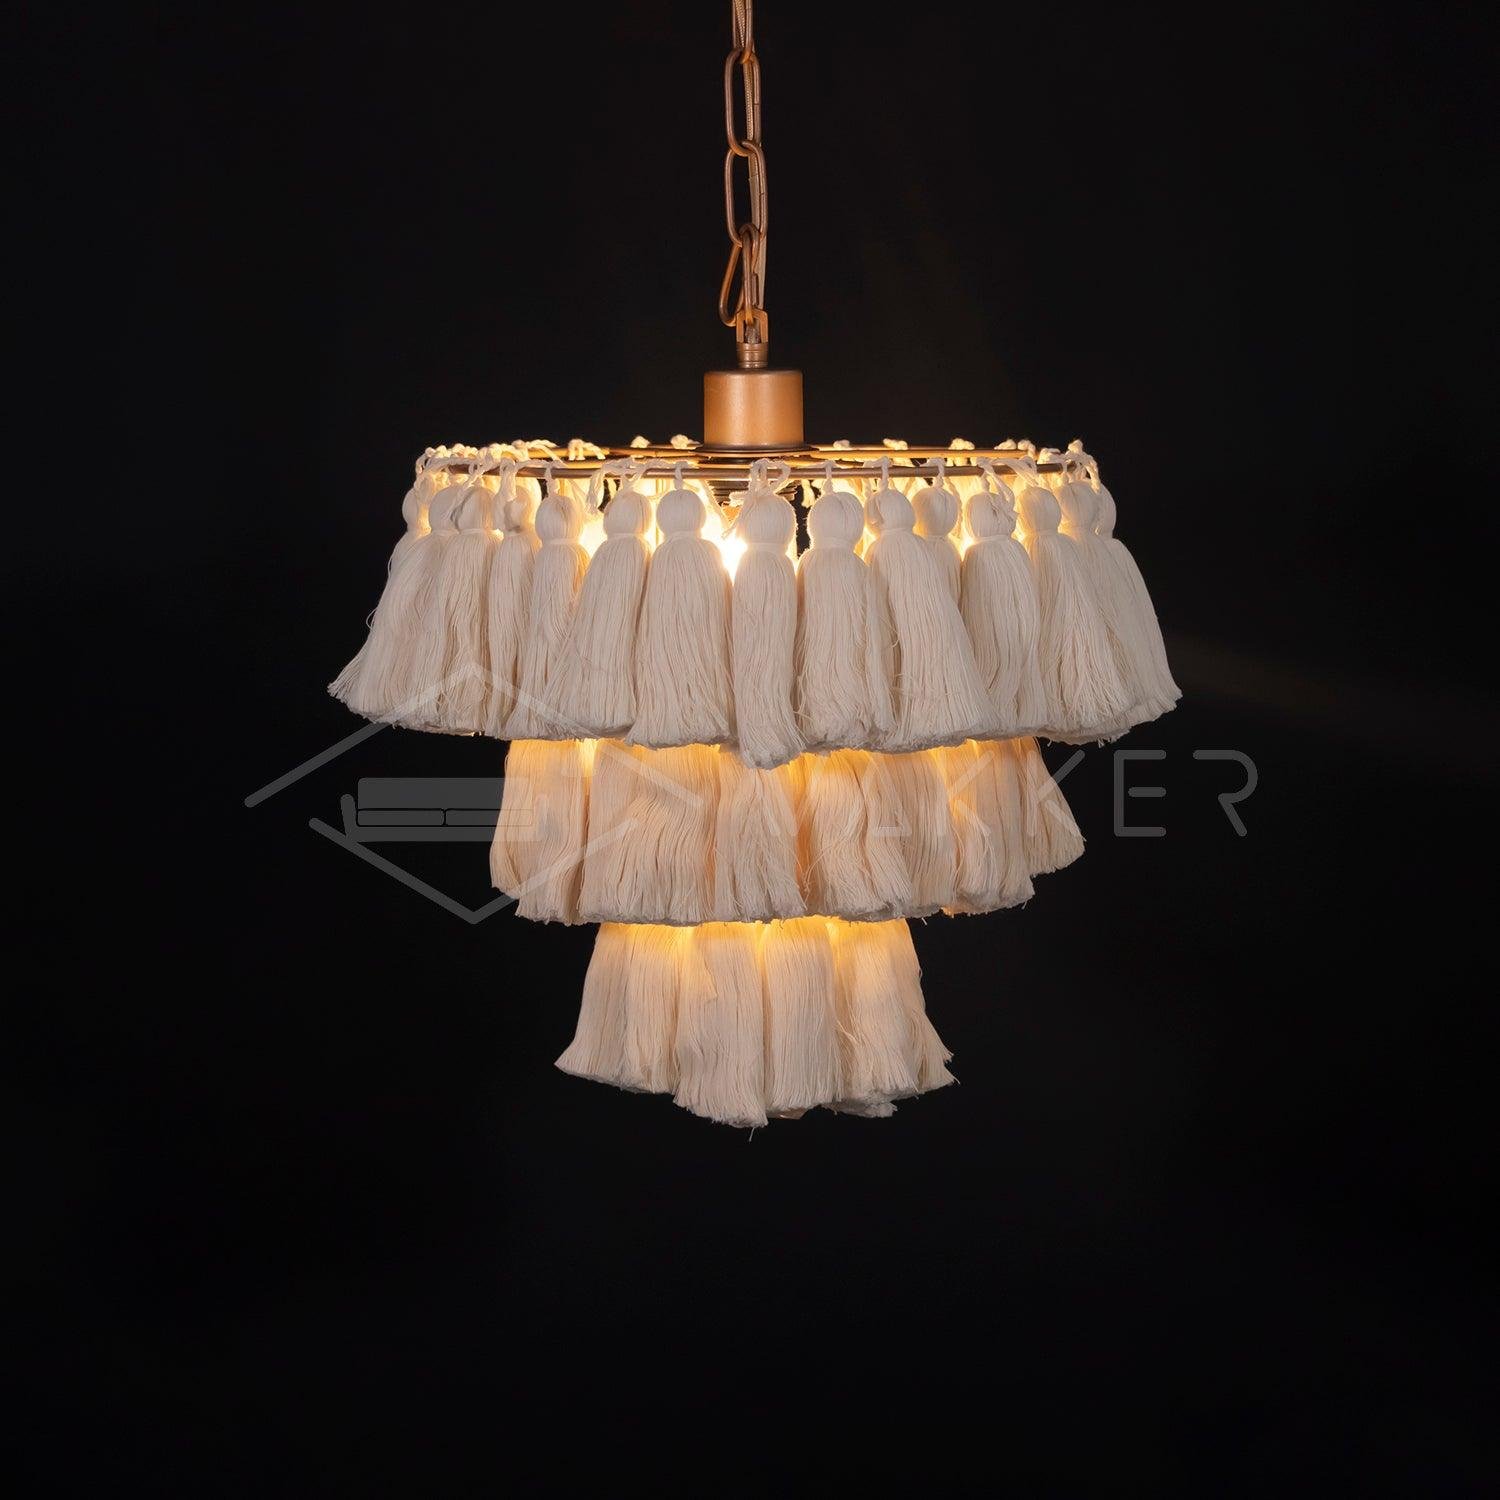 Tassel Chandeliers in White, with a diameter and height of 11.8 inches (or 30cm)